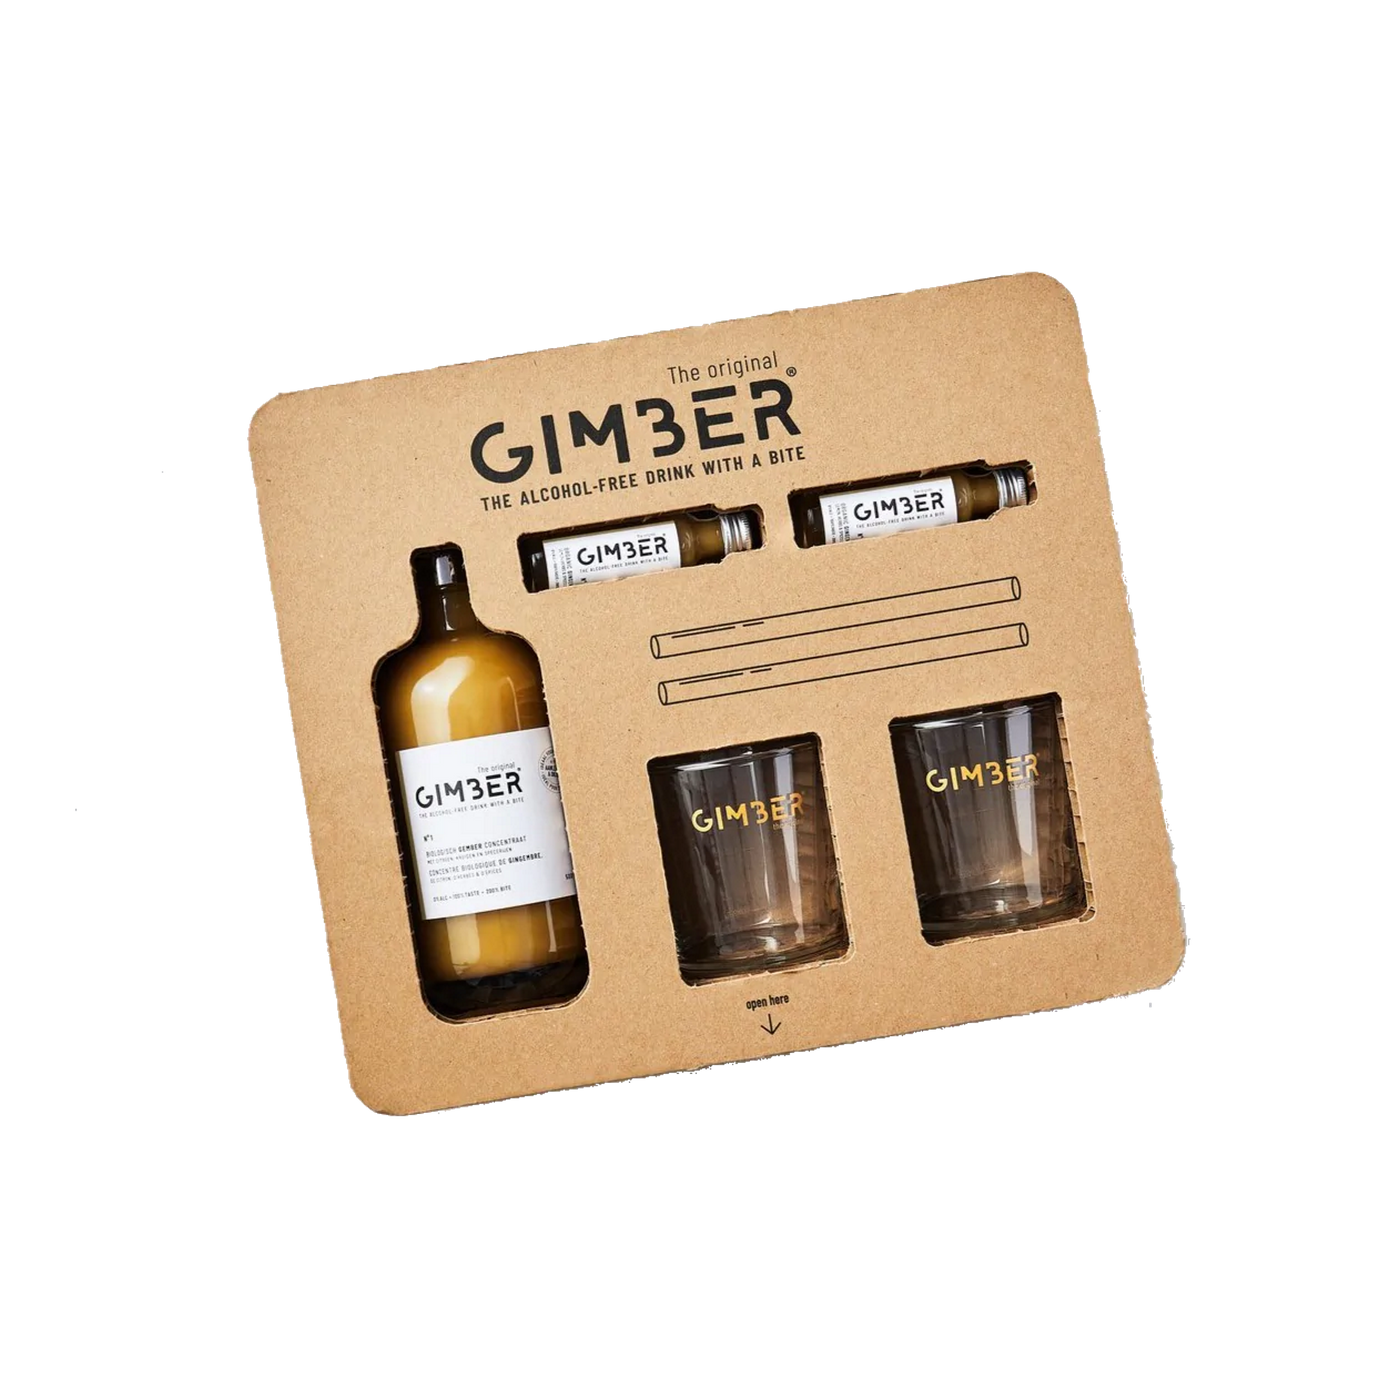 Gimber GiftBox Canada - Ginger Concentrate - alcohol free drink with bite - low sugar - low calorie alcohol alternative available at The Sobr Market in Winnipeg Canada